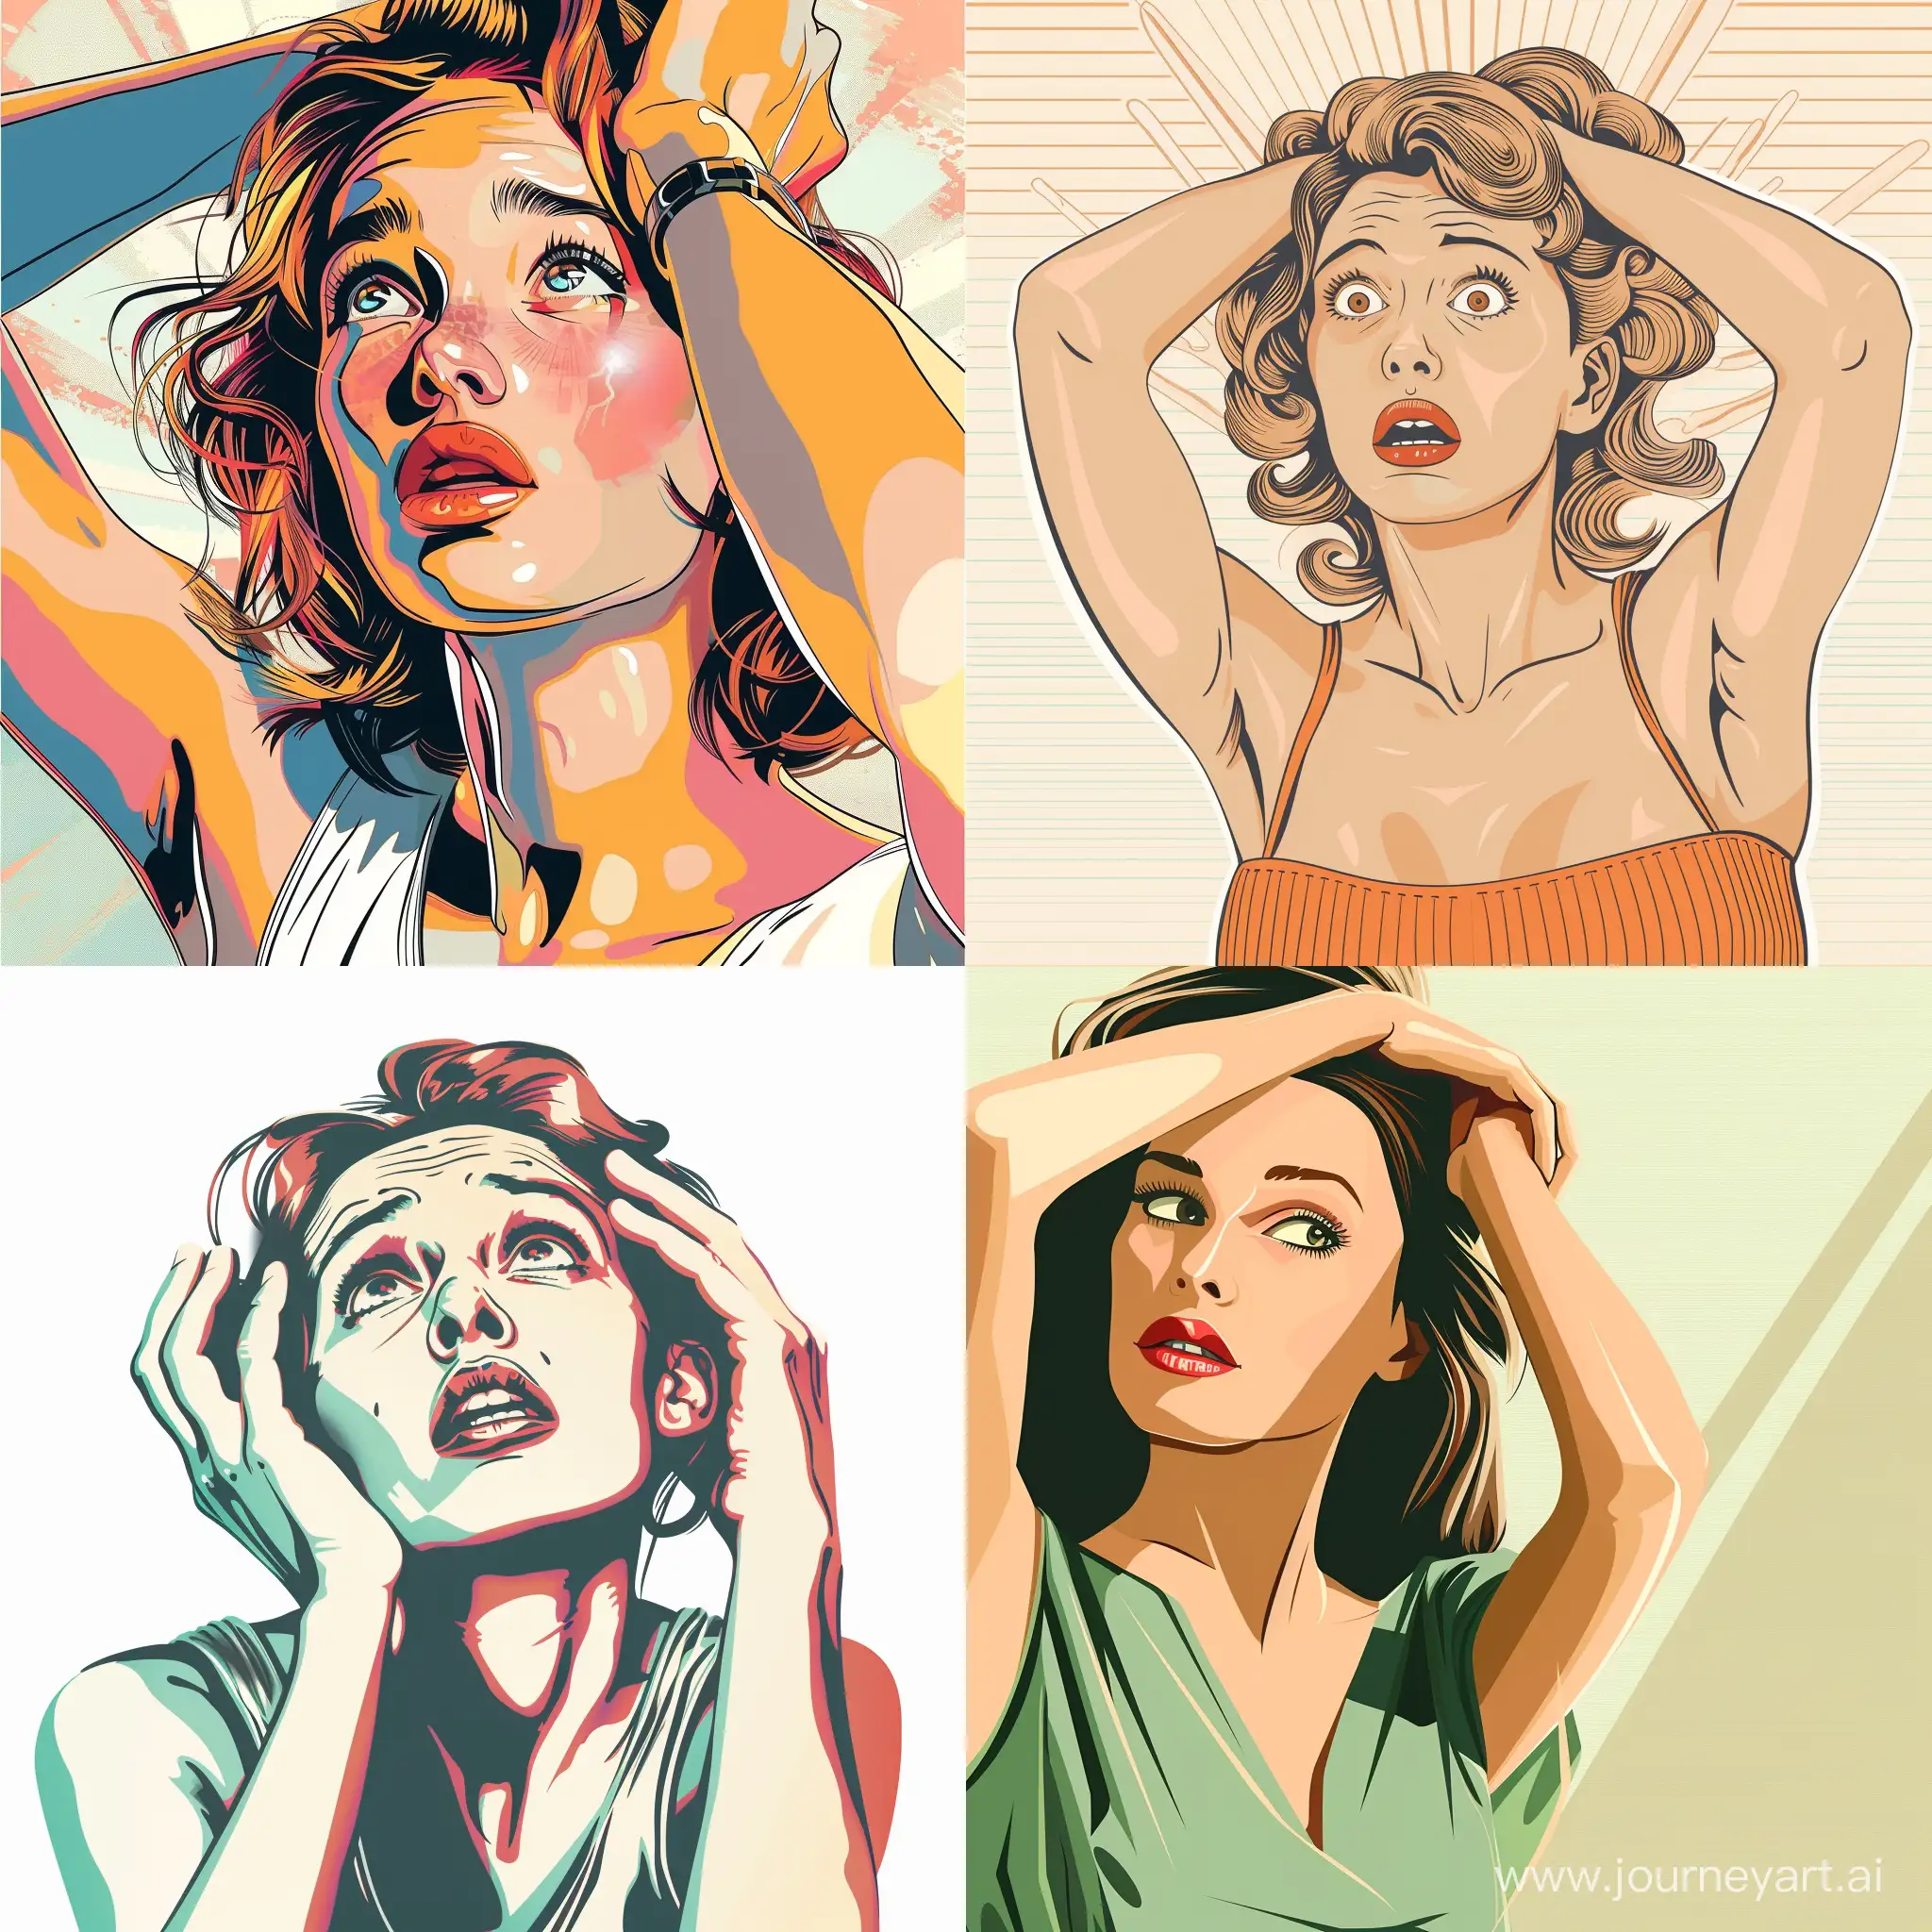 beautiful girl, emotions of surprise on her face, holding her head, waist-high portrait :: simple graphics, graphic Art Deco image in a poster, no detail, no realism, no more than 3 colors, white background